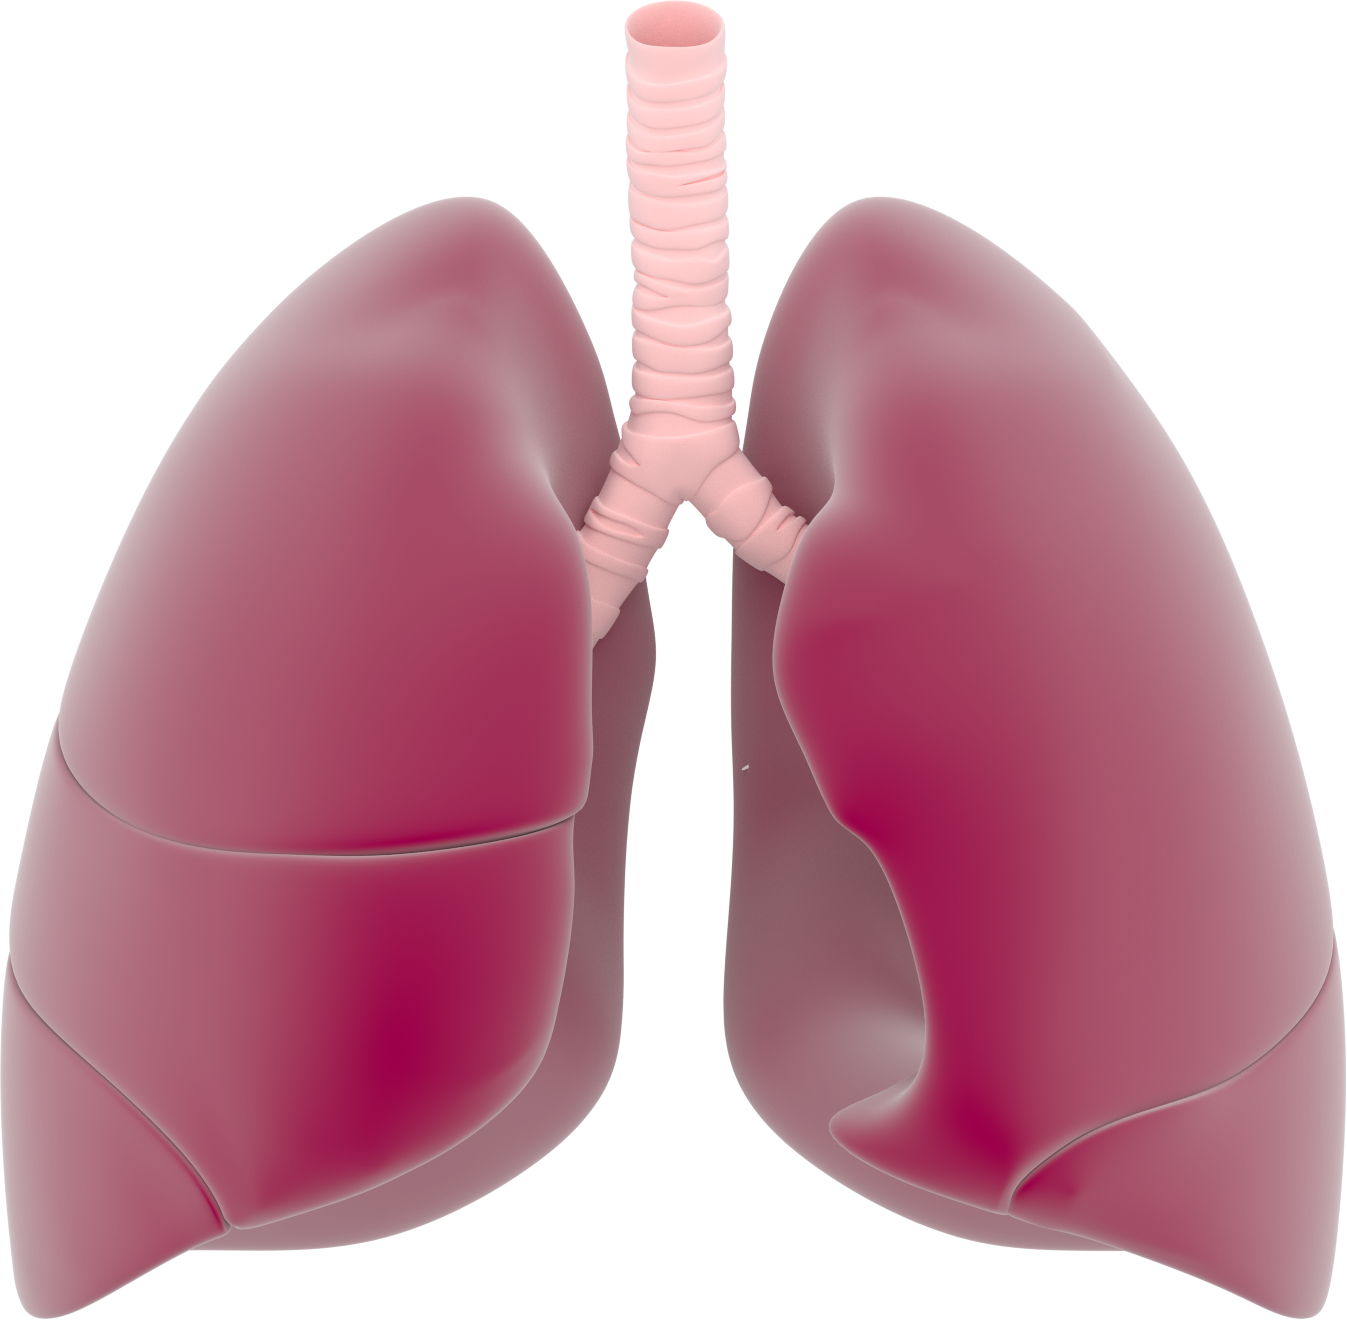 Lungs Png Transparent Images - Lungs Png (1347x1320)